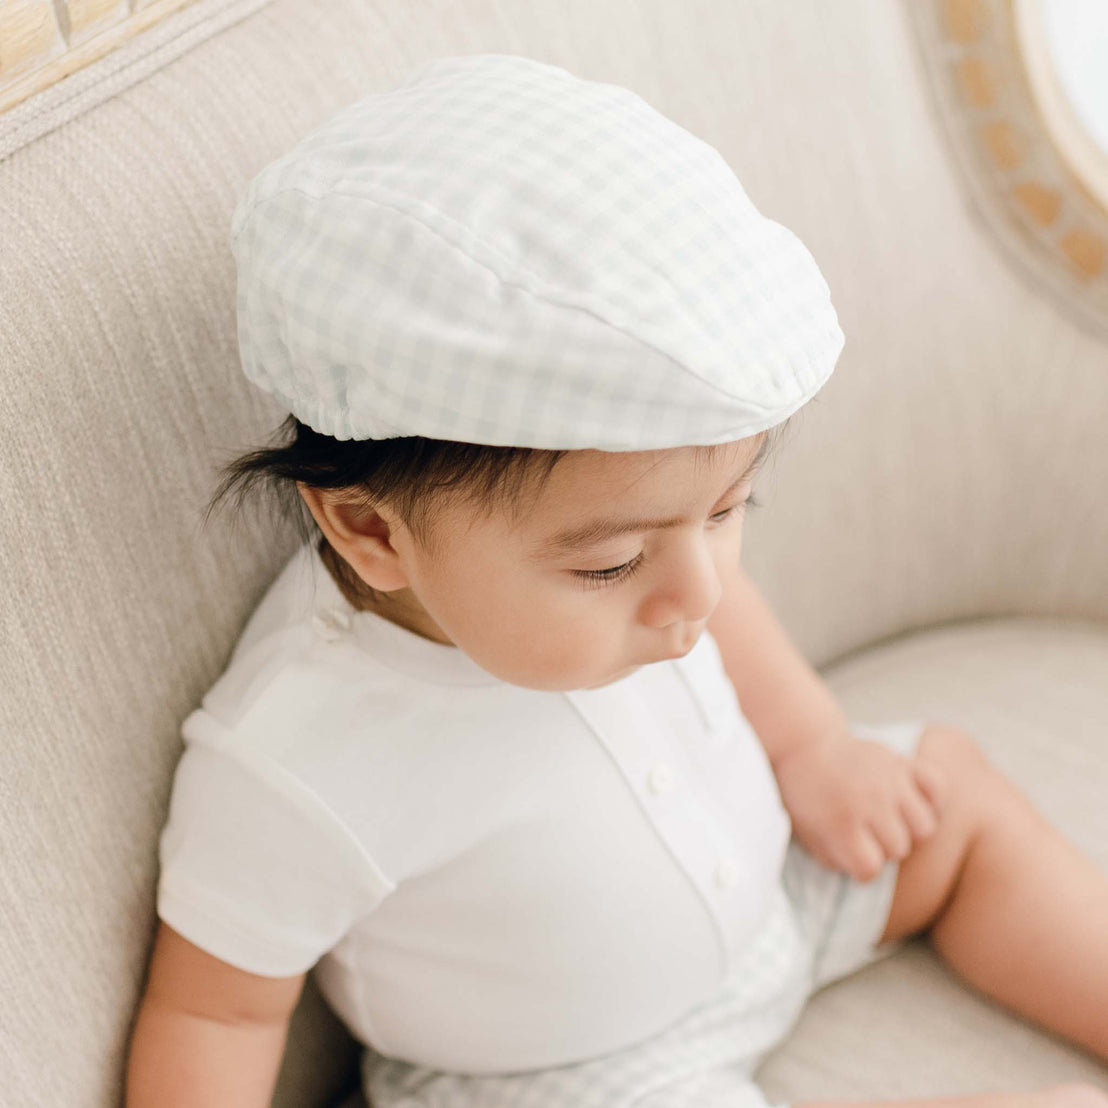 A baby wearing an Ian Checked Newsboy Cap and white outfit, sitting on a beige cushioned chair, looking down thoughtfully.